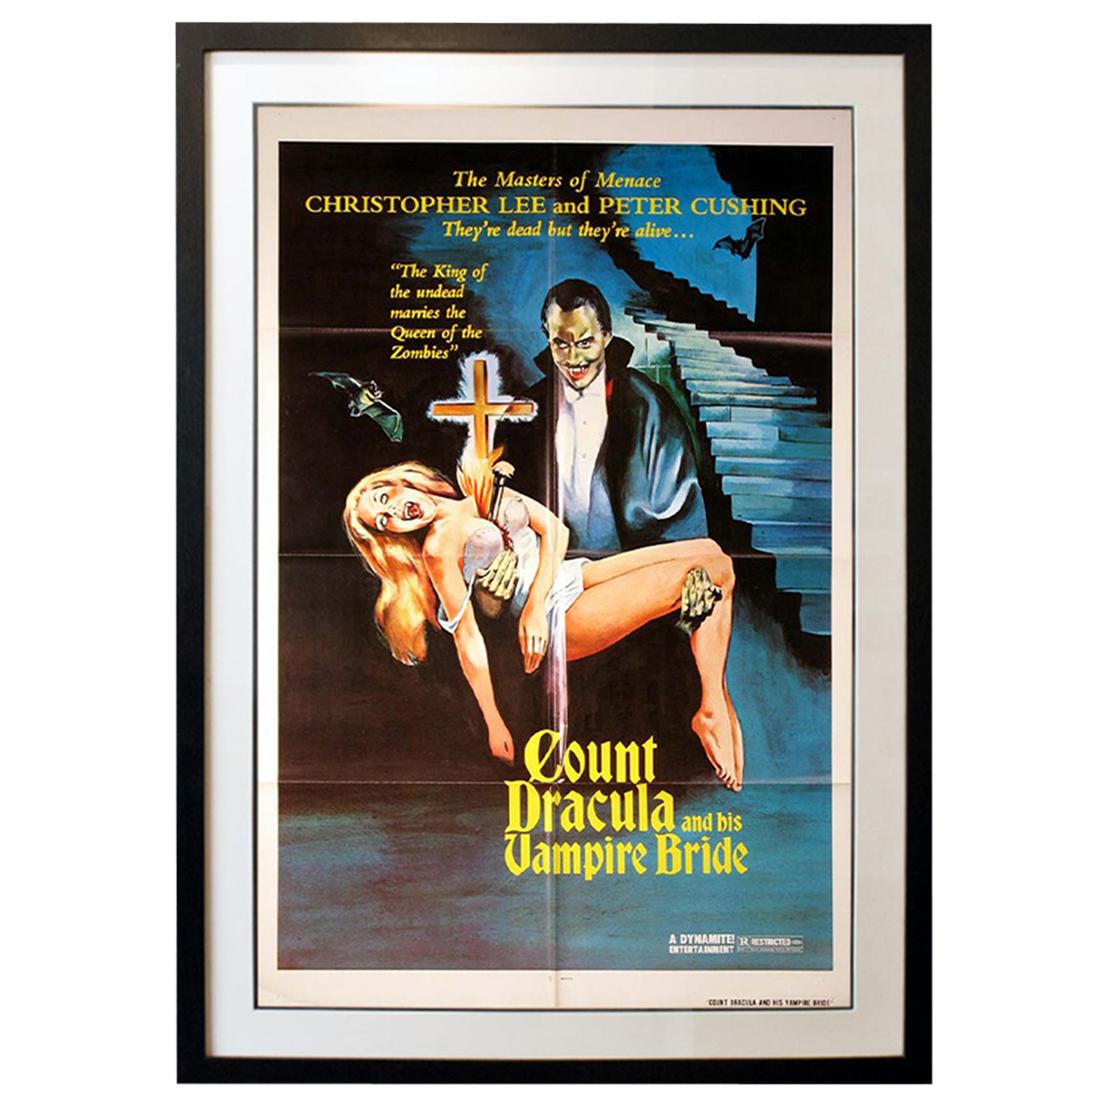 "Count Dracula and his Vampire Bride" '1973' Poster For Sale